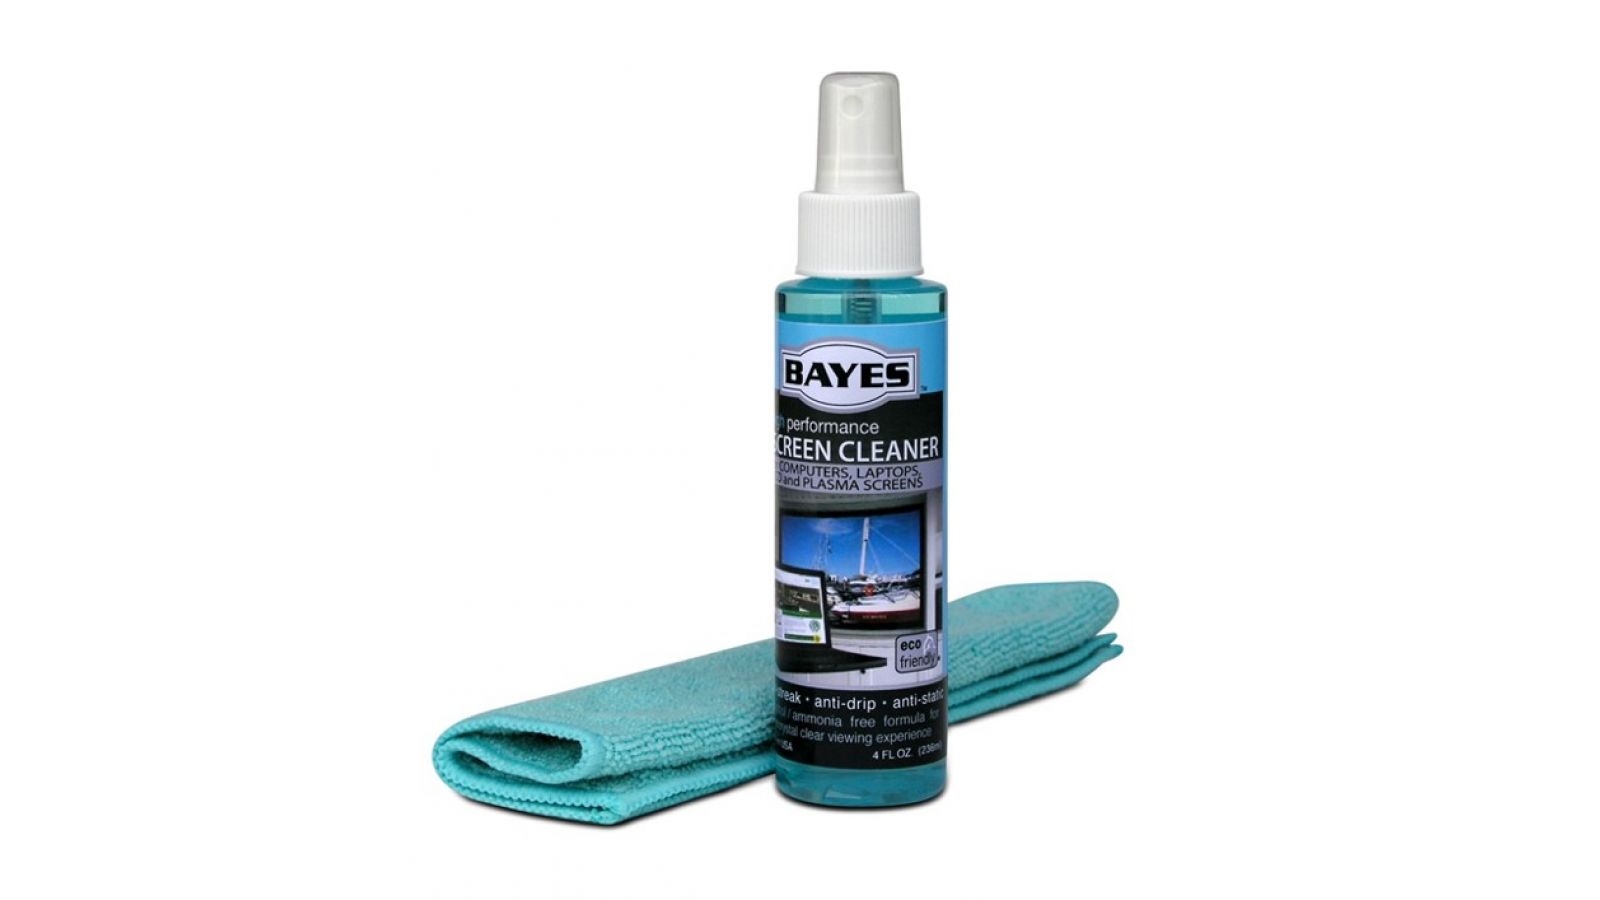 Bayes High-Performance Eco-Responsible Screen Cleaner with Premium Microfiber Cloth - Cleaning Spray Solution for All Tech Gadgets and Electronics